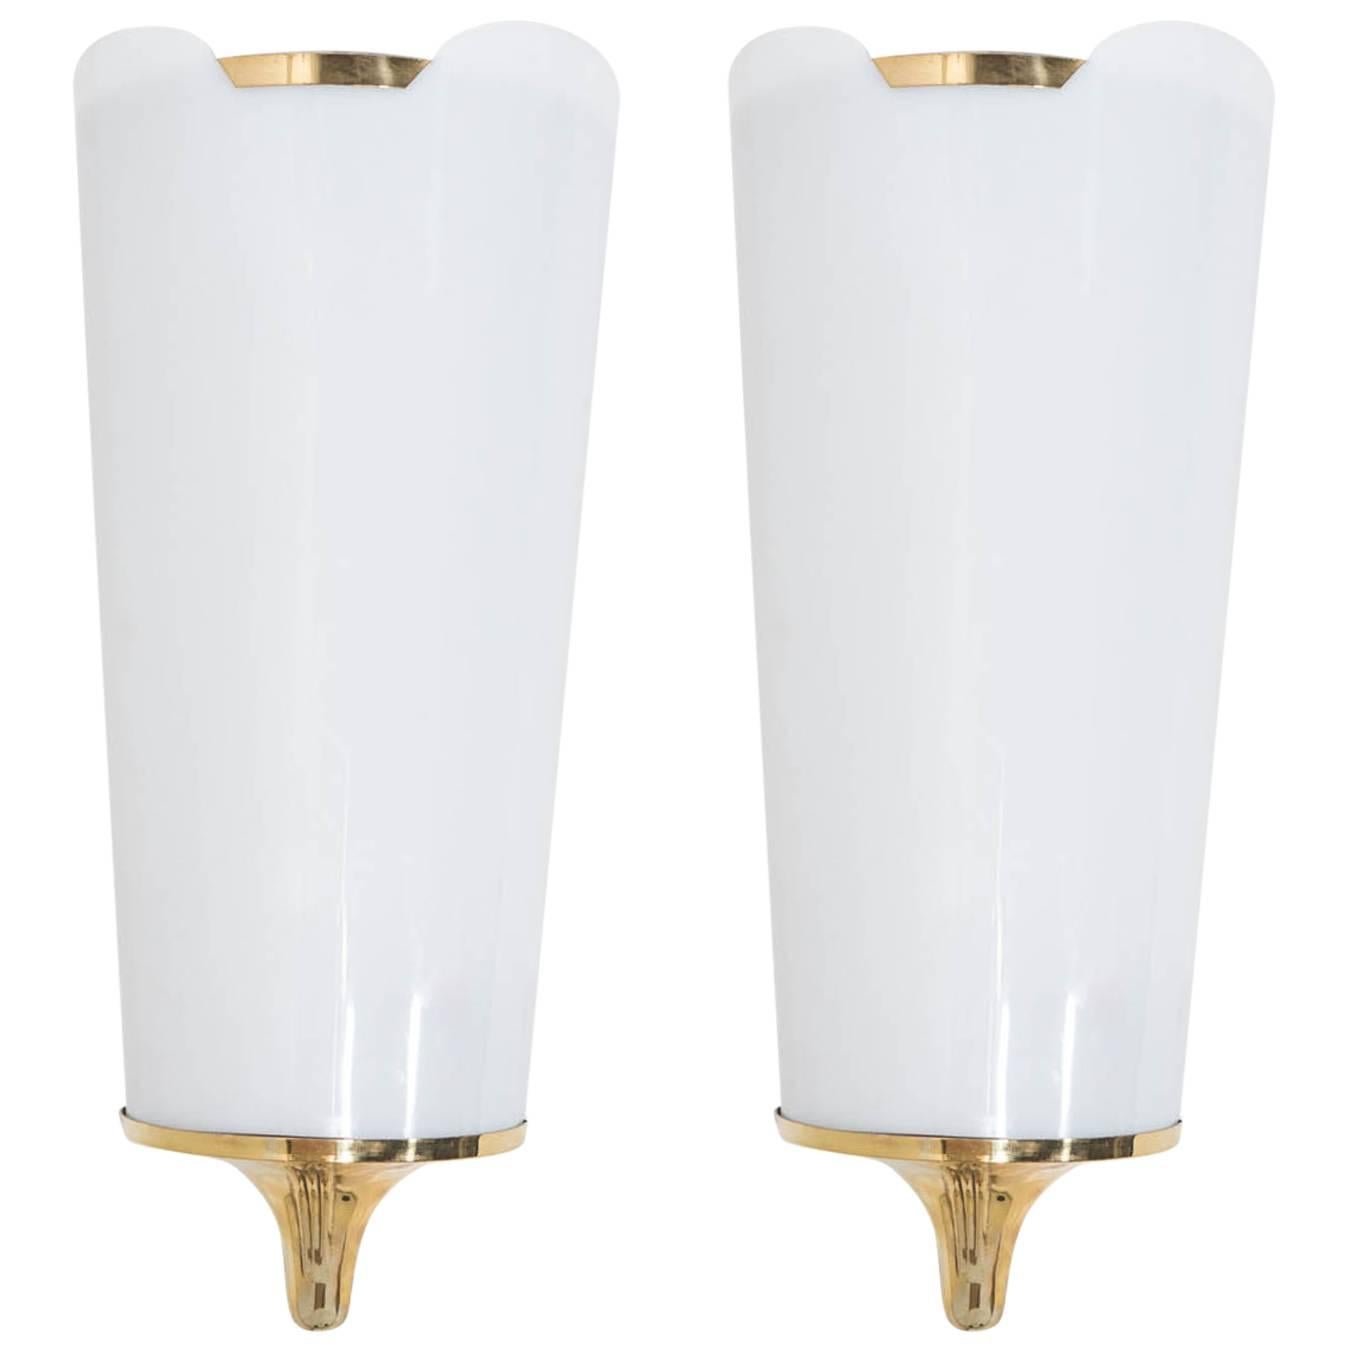 Pair of White Acrylic and Brass Italian Sconces, circa 1950s For Sale